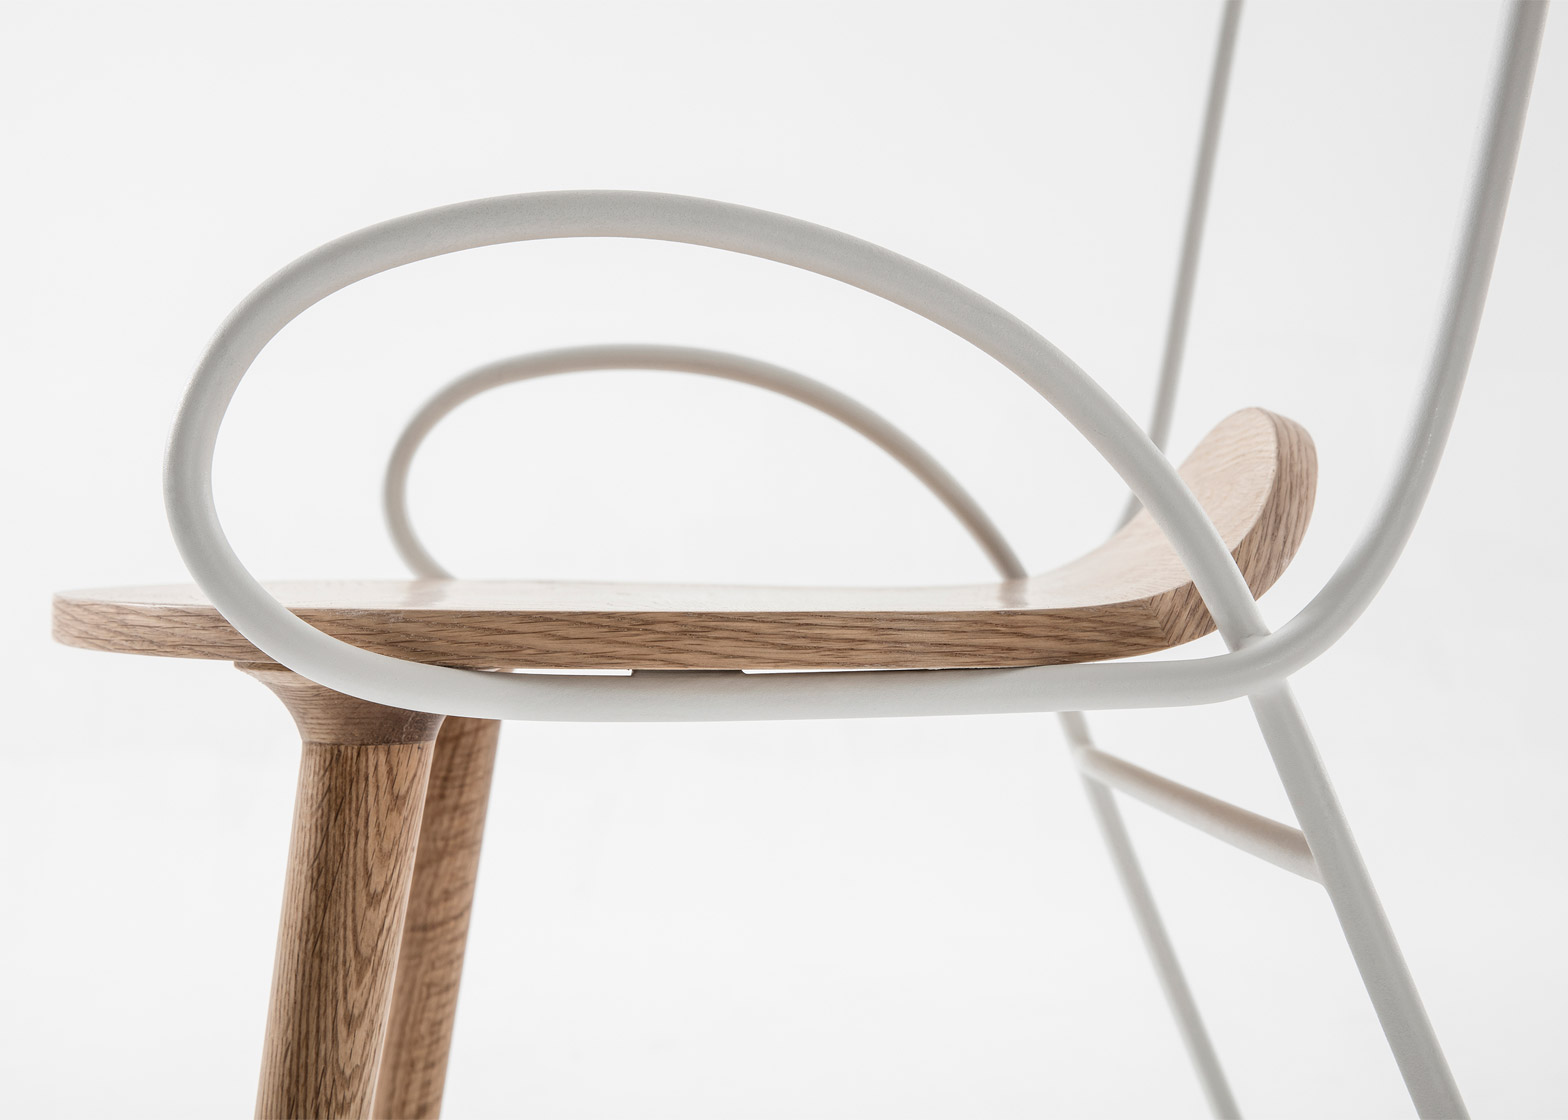 Wooden Chairs: Meet the amazing Sylph chair by Atelier Deshaus